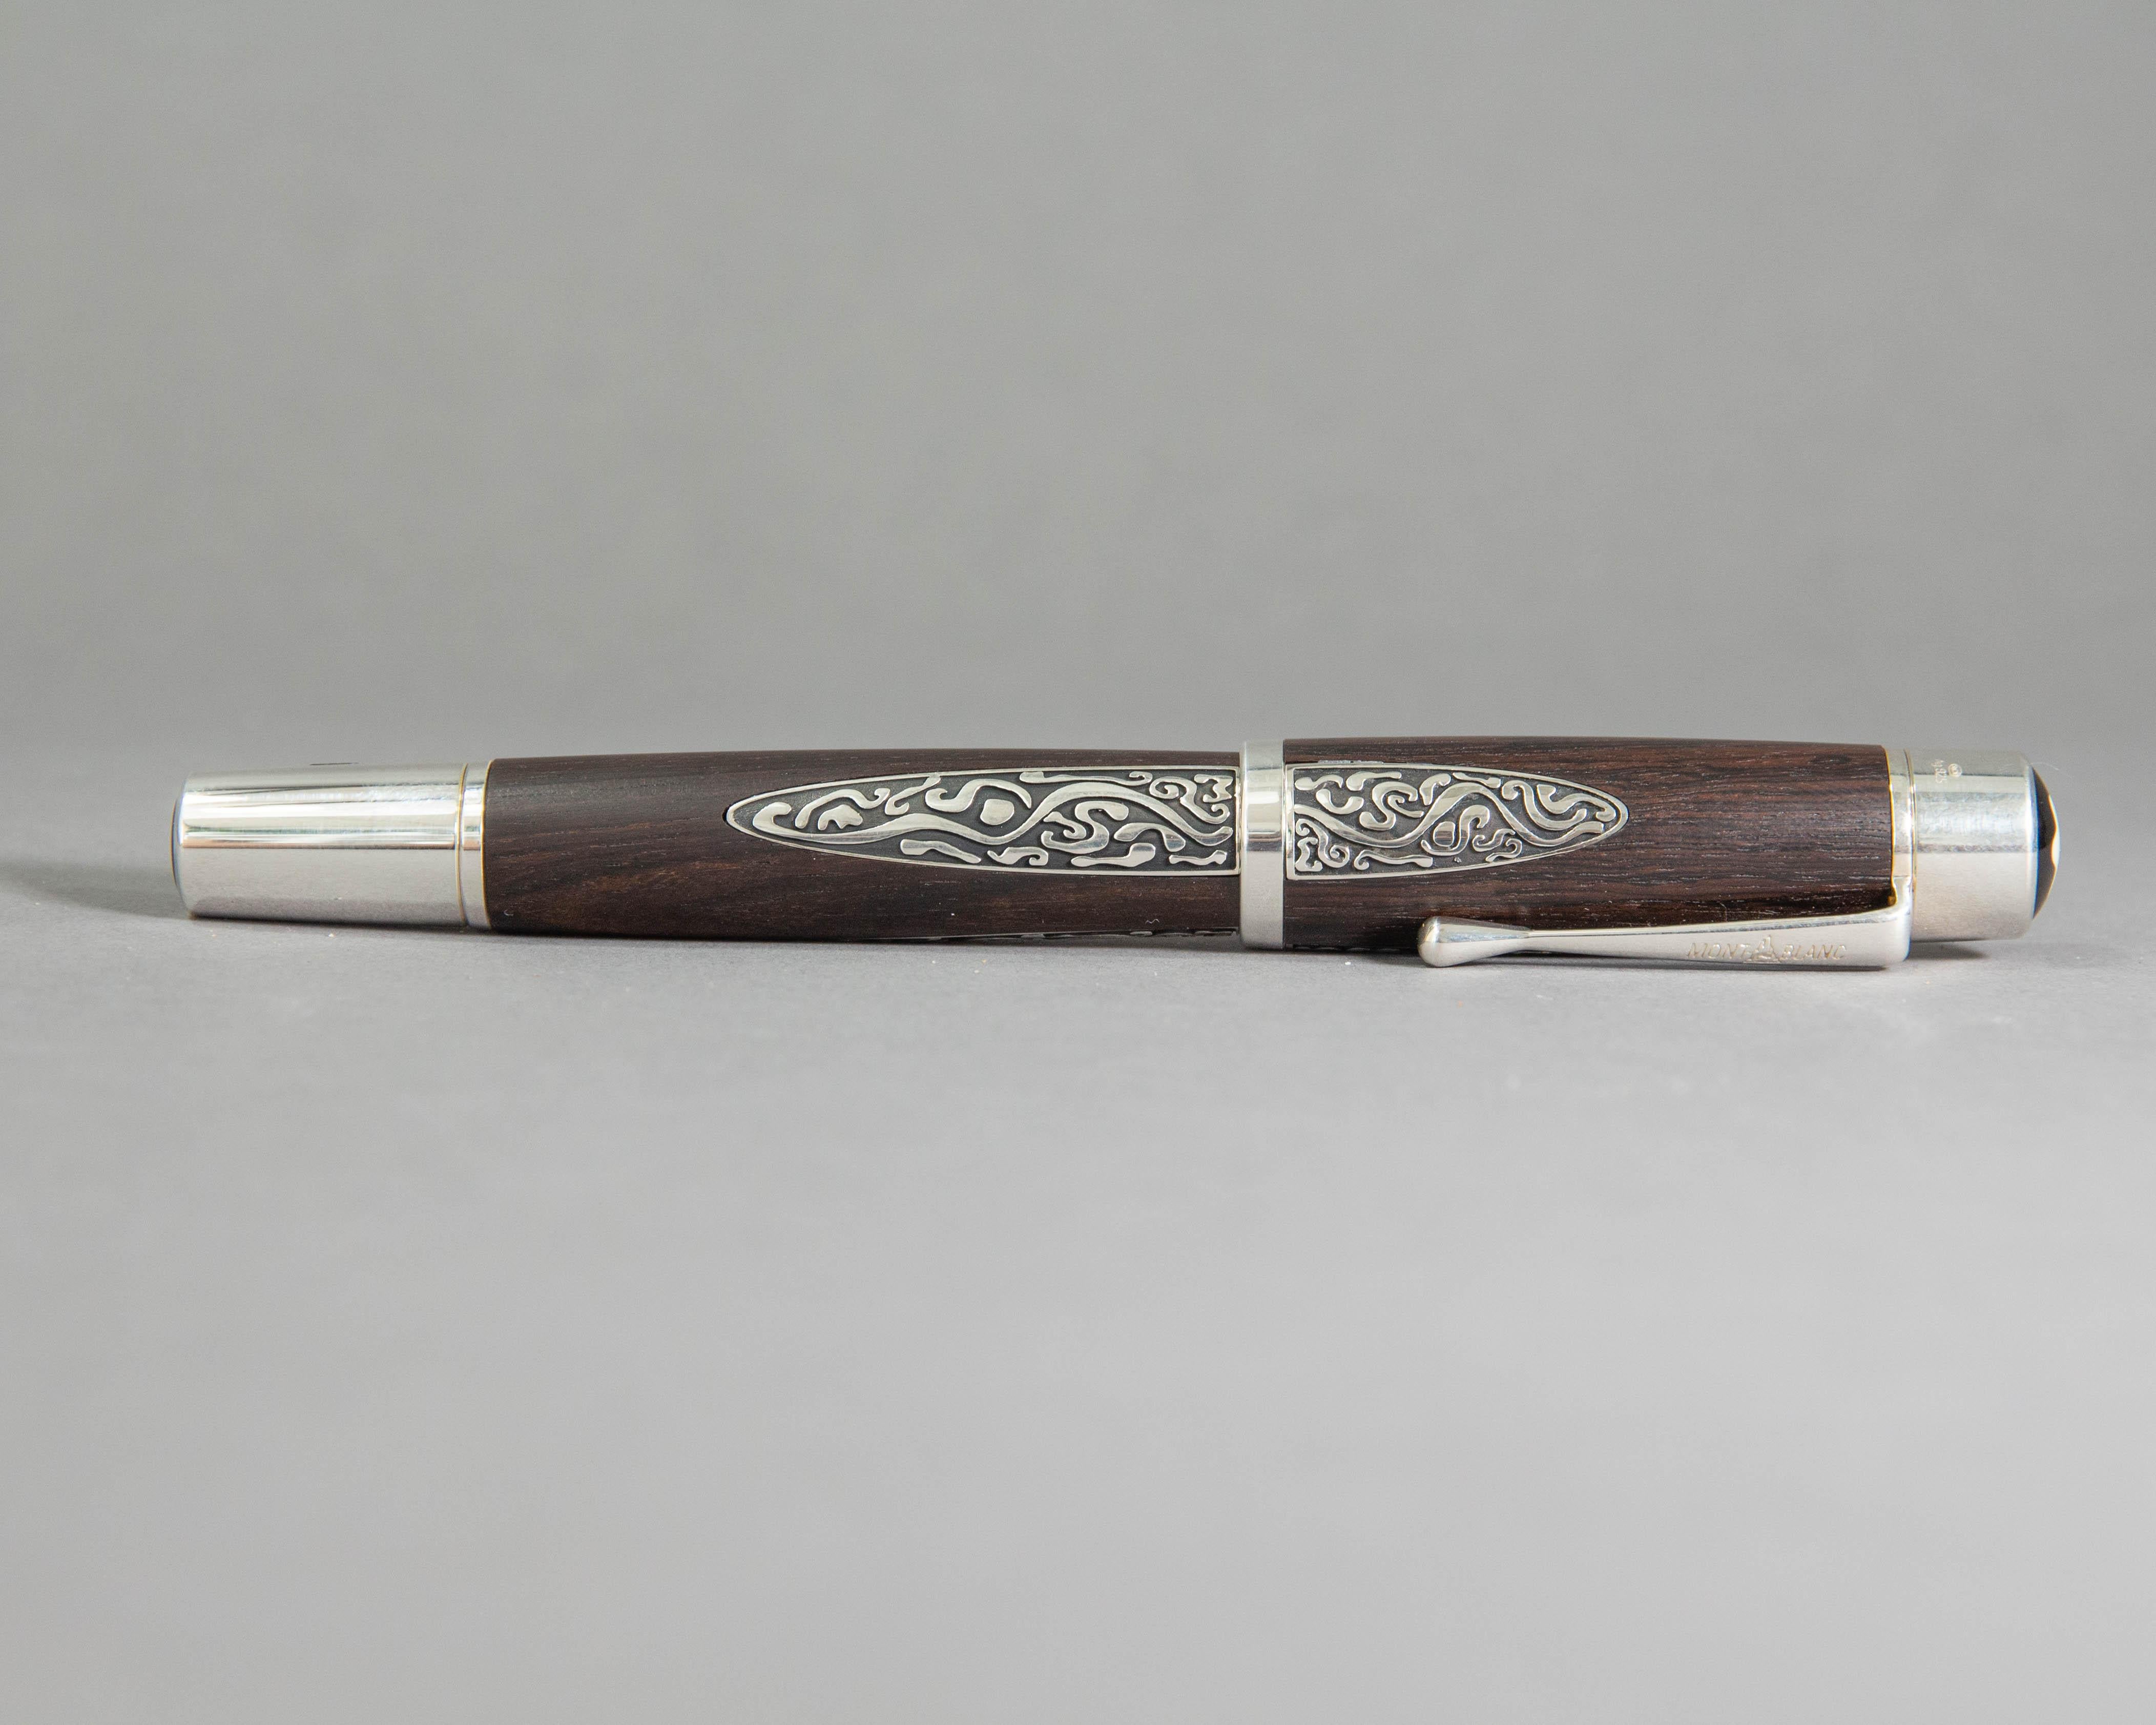 A stunning limited edition fountain pen made by Montblanc.

The pen is part of a limited edition series called: 'Patron of arts, Alexander von Humboldt'. The pen is made to commemorate the the great naturalist and explorer.

The pen is made of